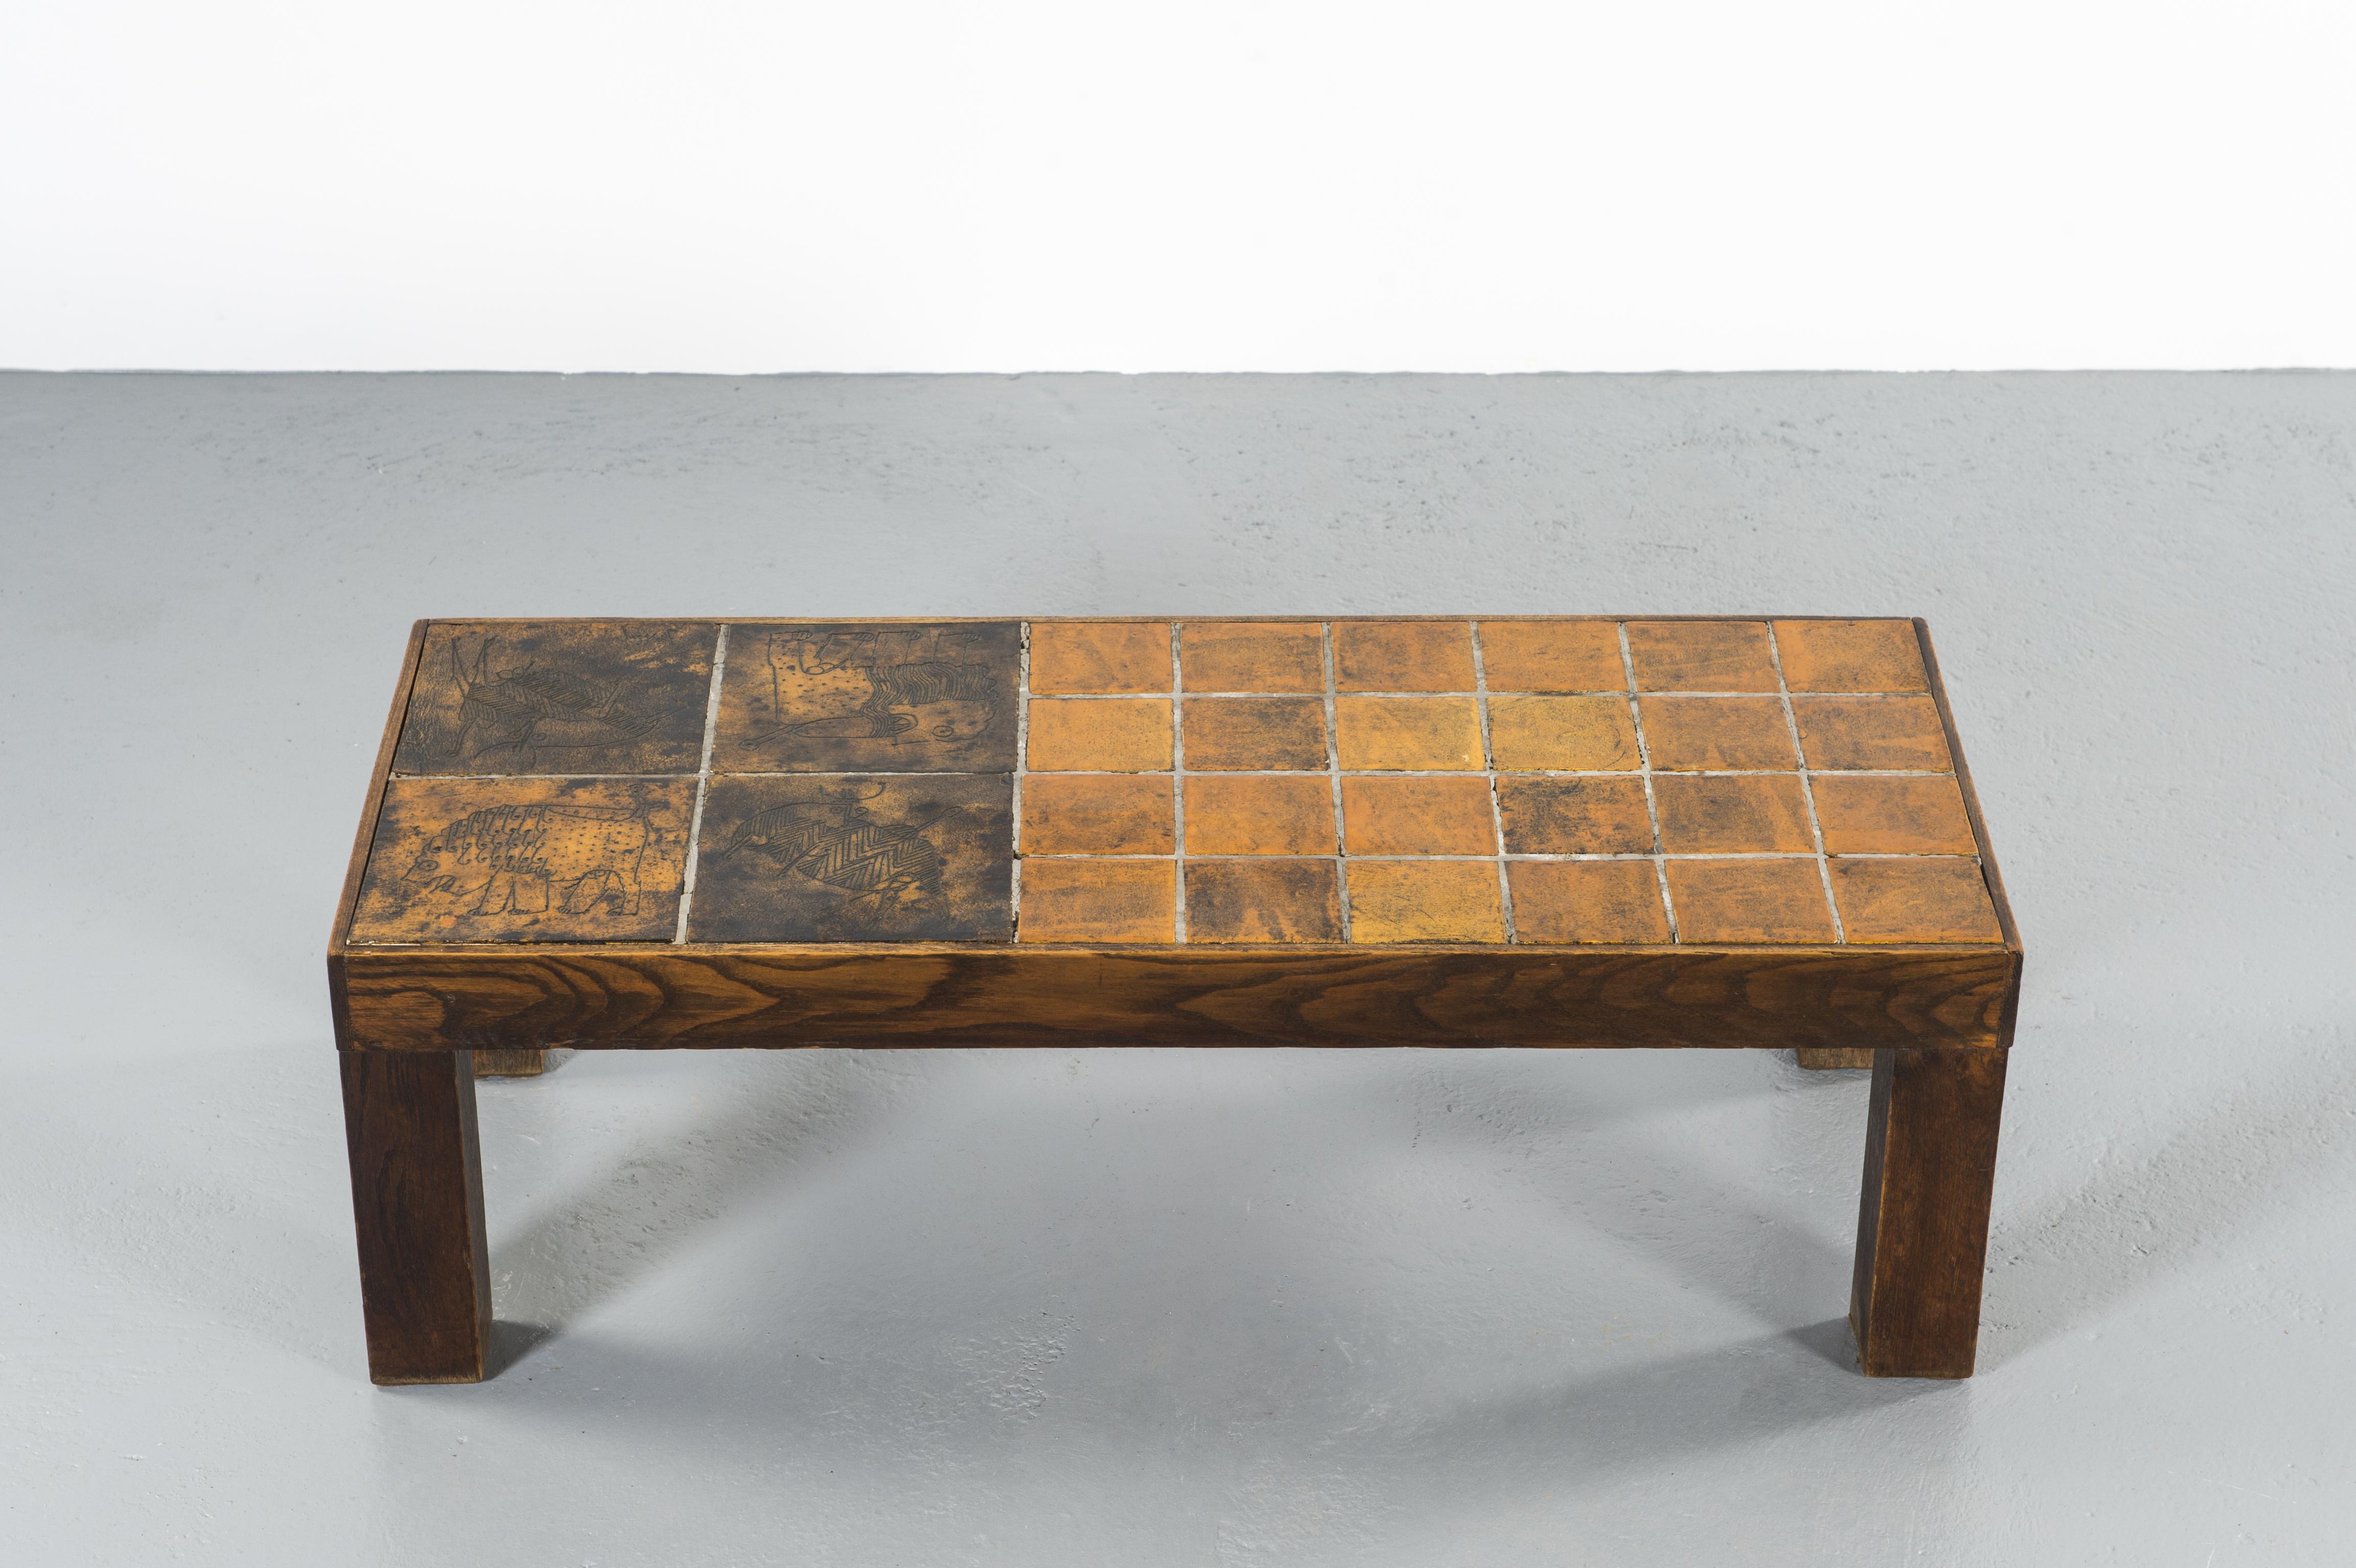 Ceramic Coffee Table by Jacques Blin, 1945 at 1stDibs